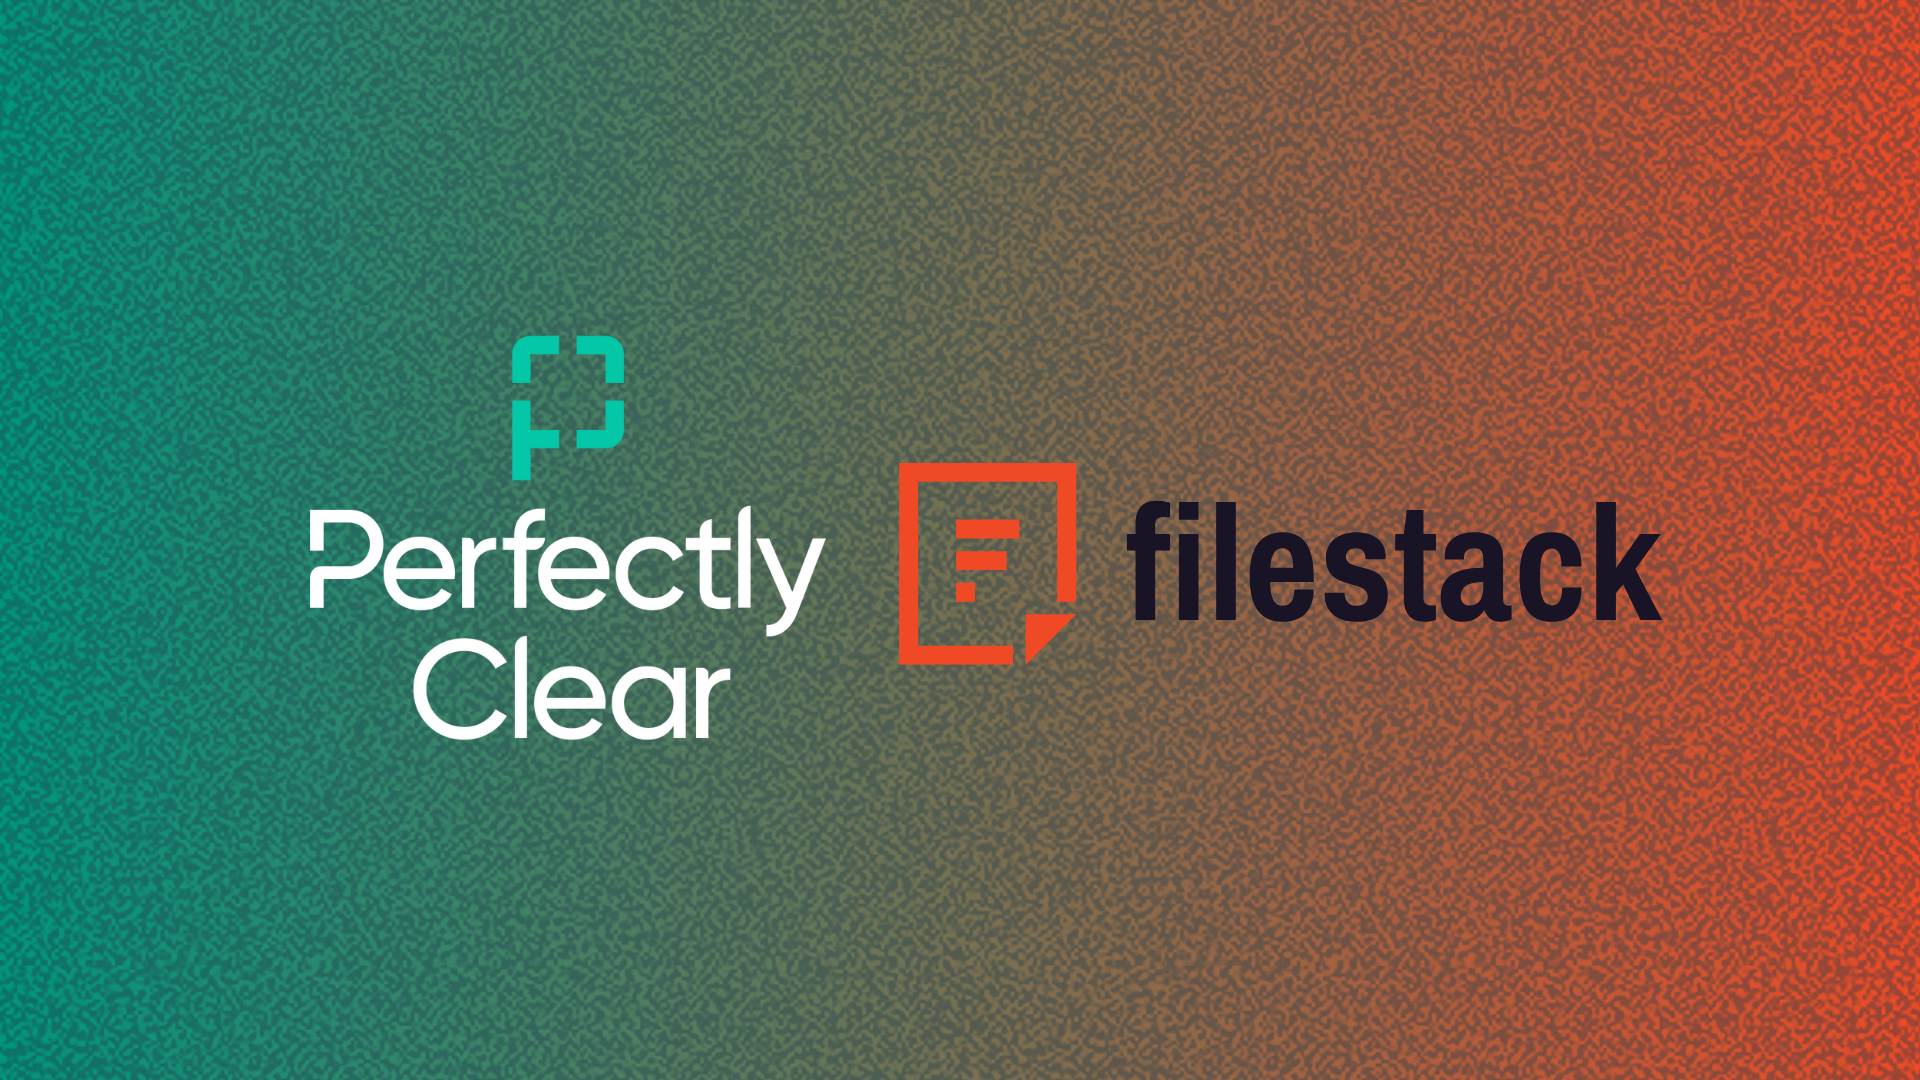 Seamless Integration: Perfectly Clear Meets Filestack